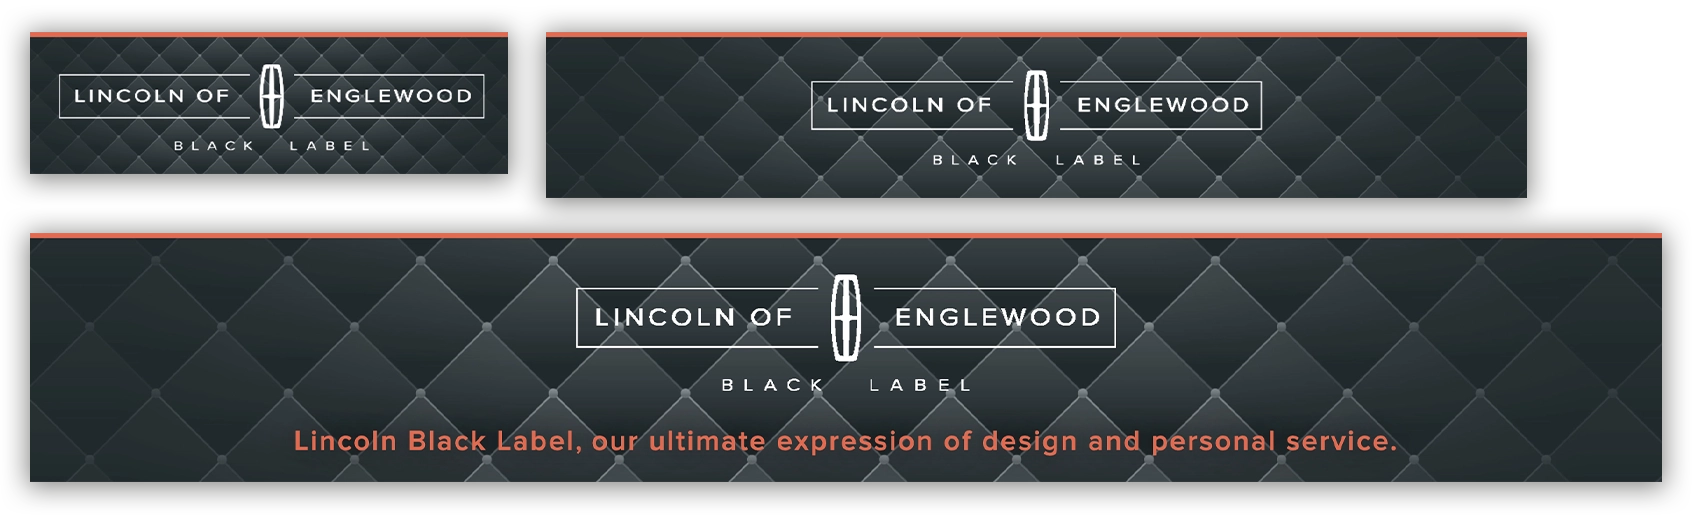 Lincoln Blacl Label web banners